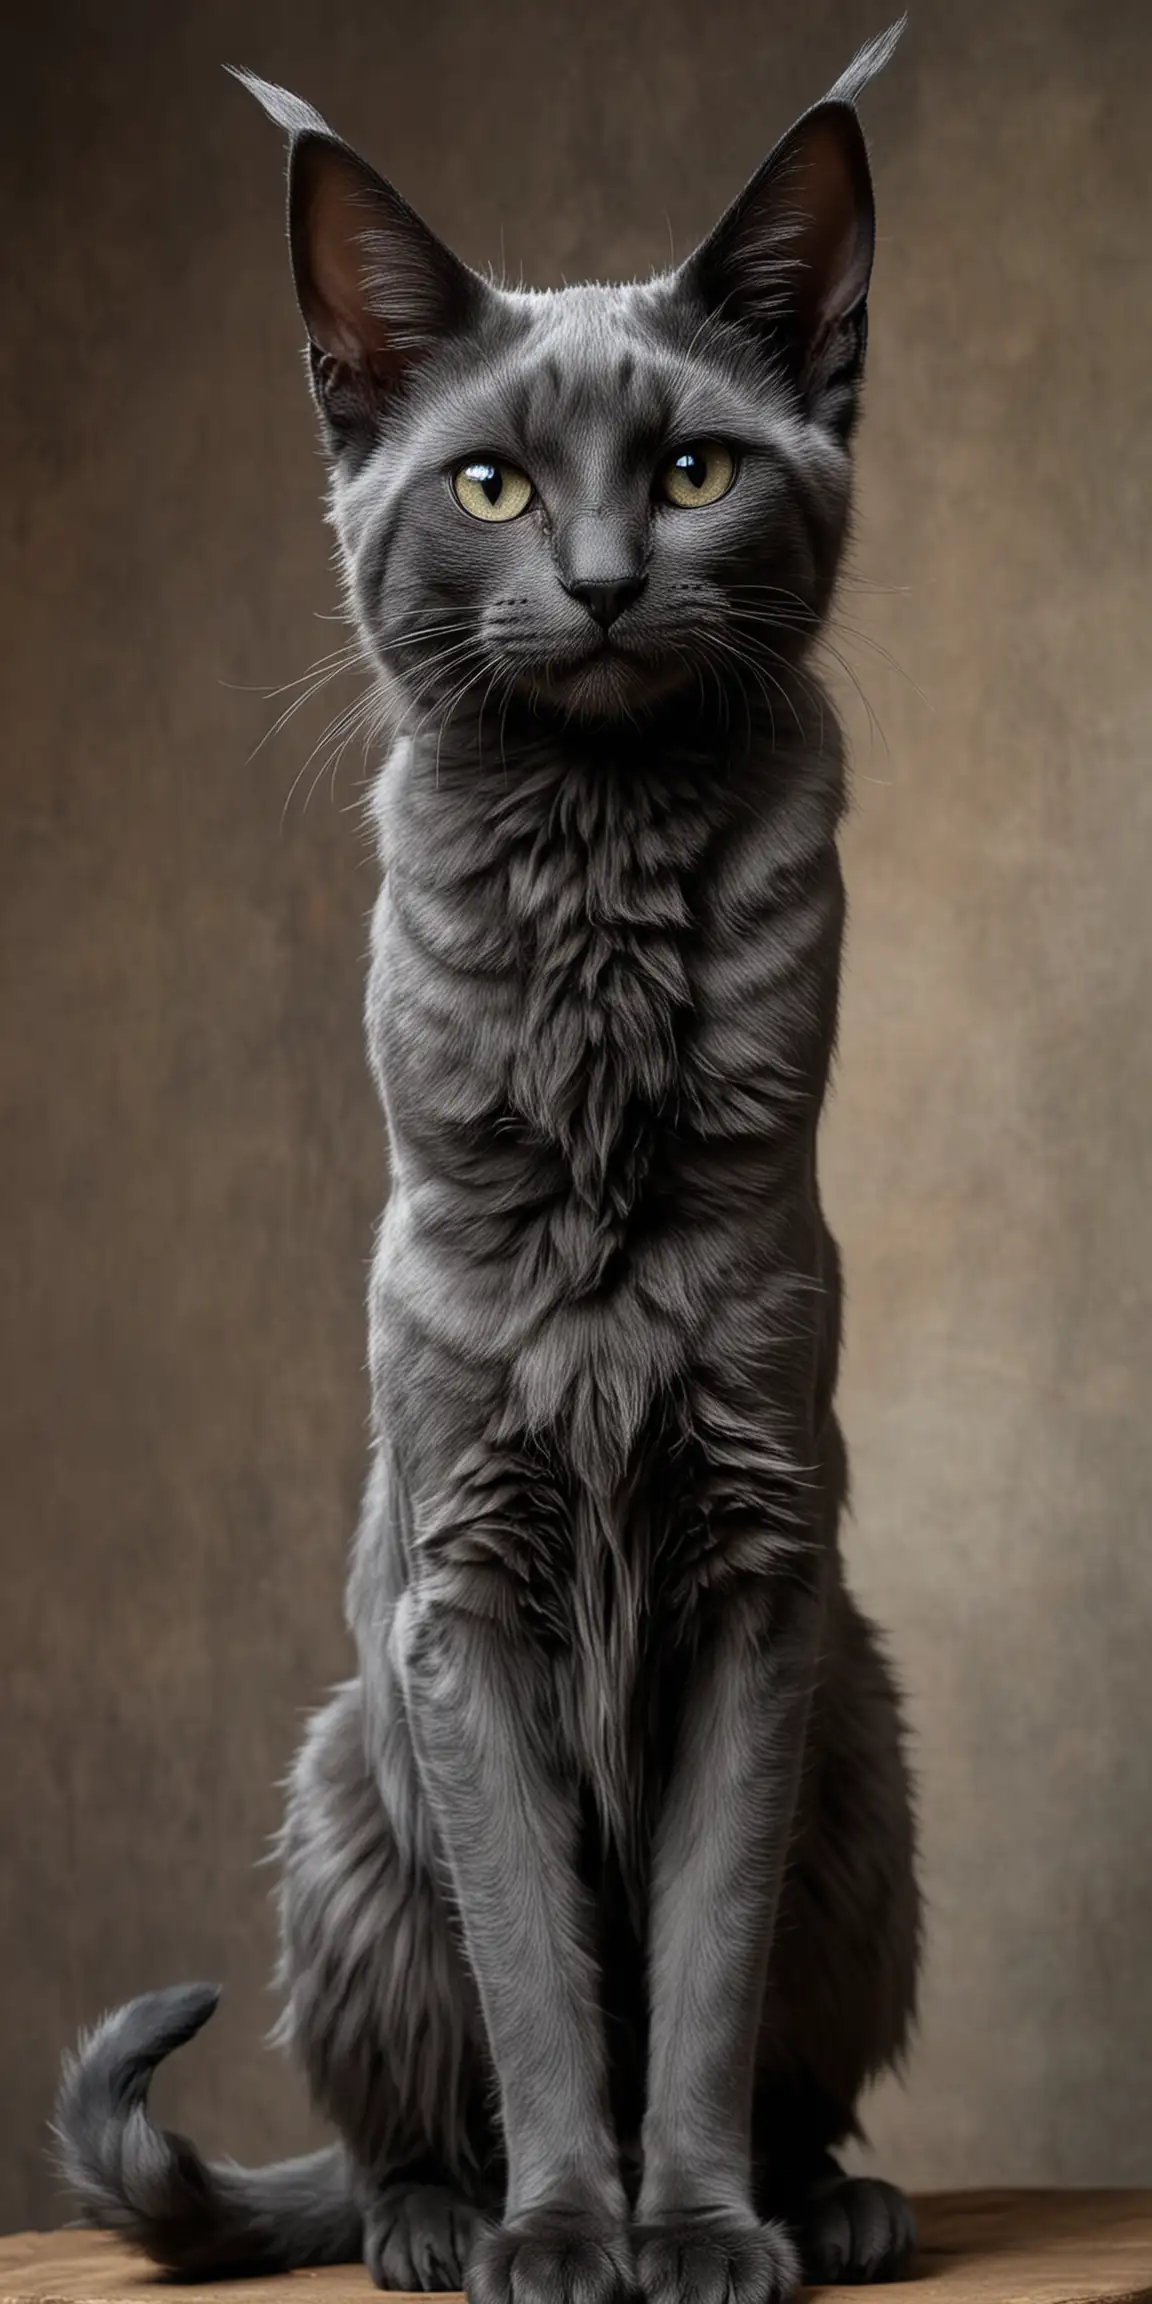 Majestic Fantasy Cats with Tall Pointy Ears in Black and Grey